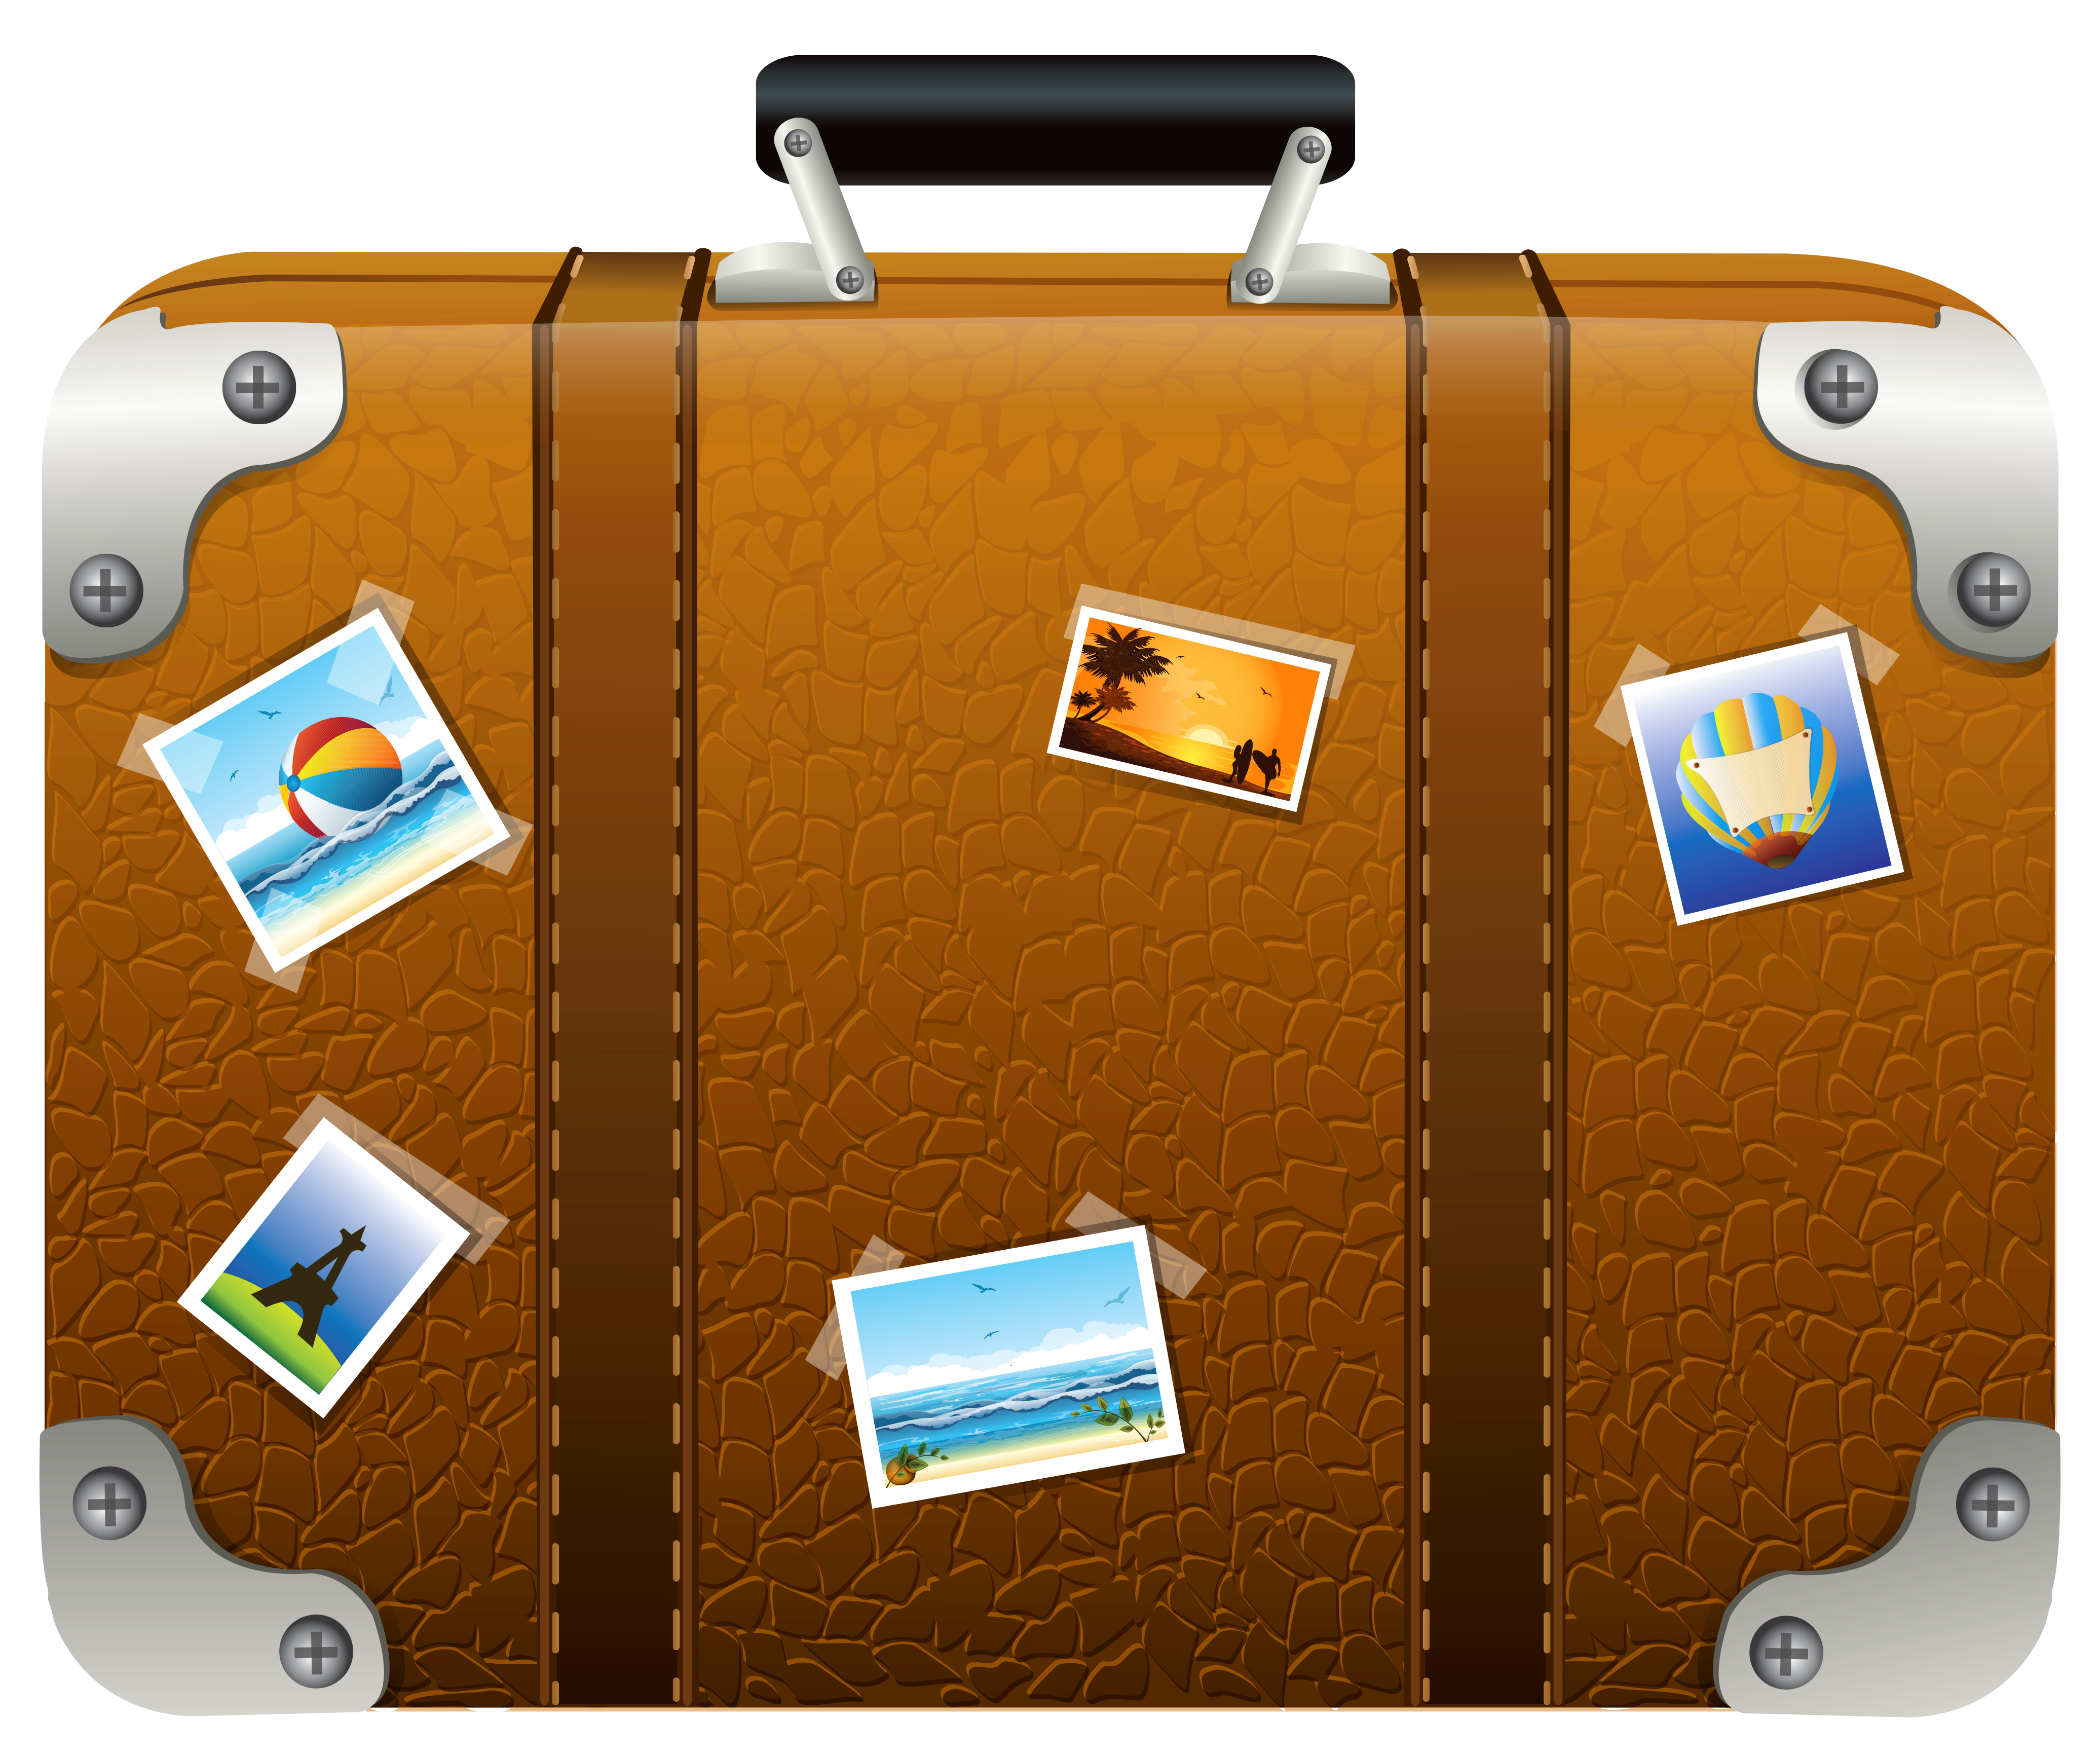 suitcase clipart free